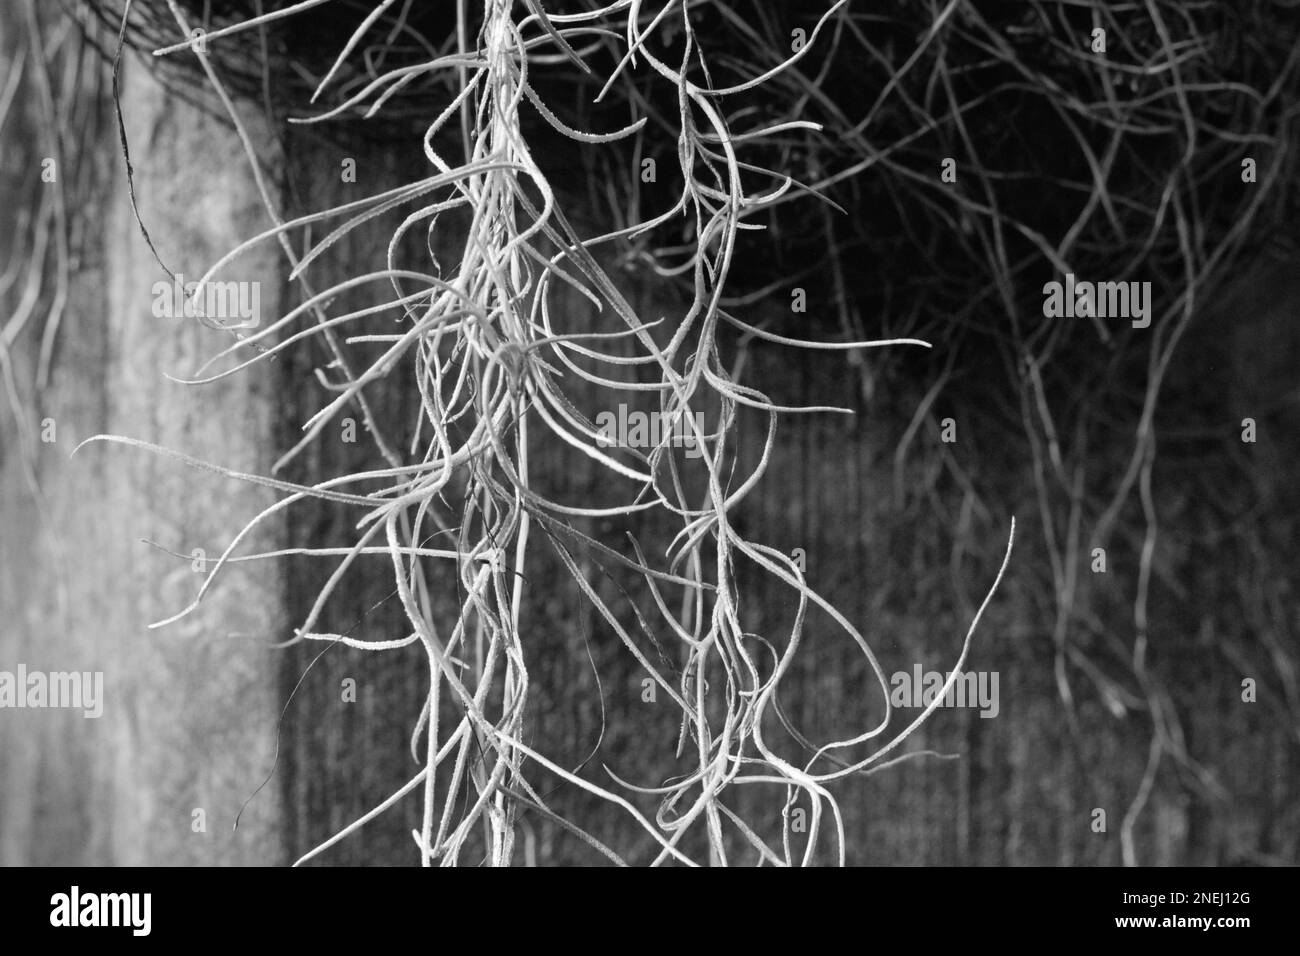 Typical common tropical Spanish moss hanging on a tree branch in the jungle in a black and white monochrome. Stock Photo